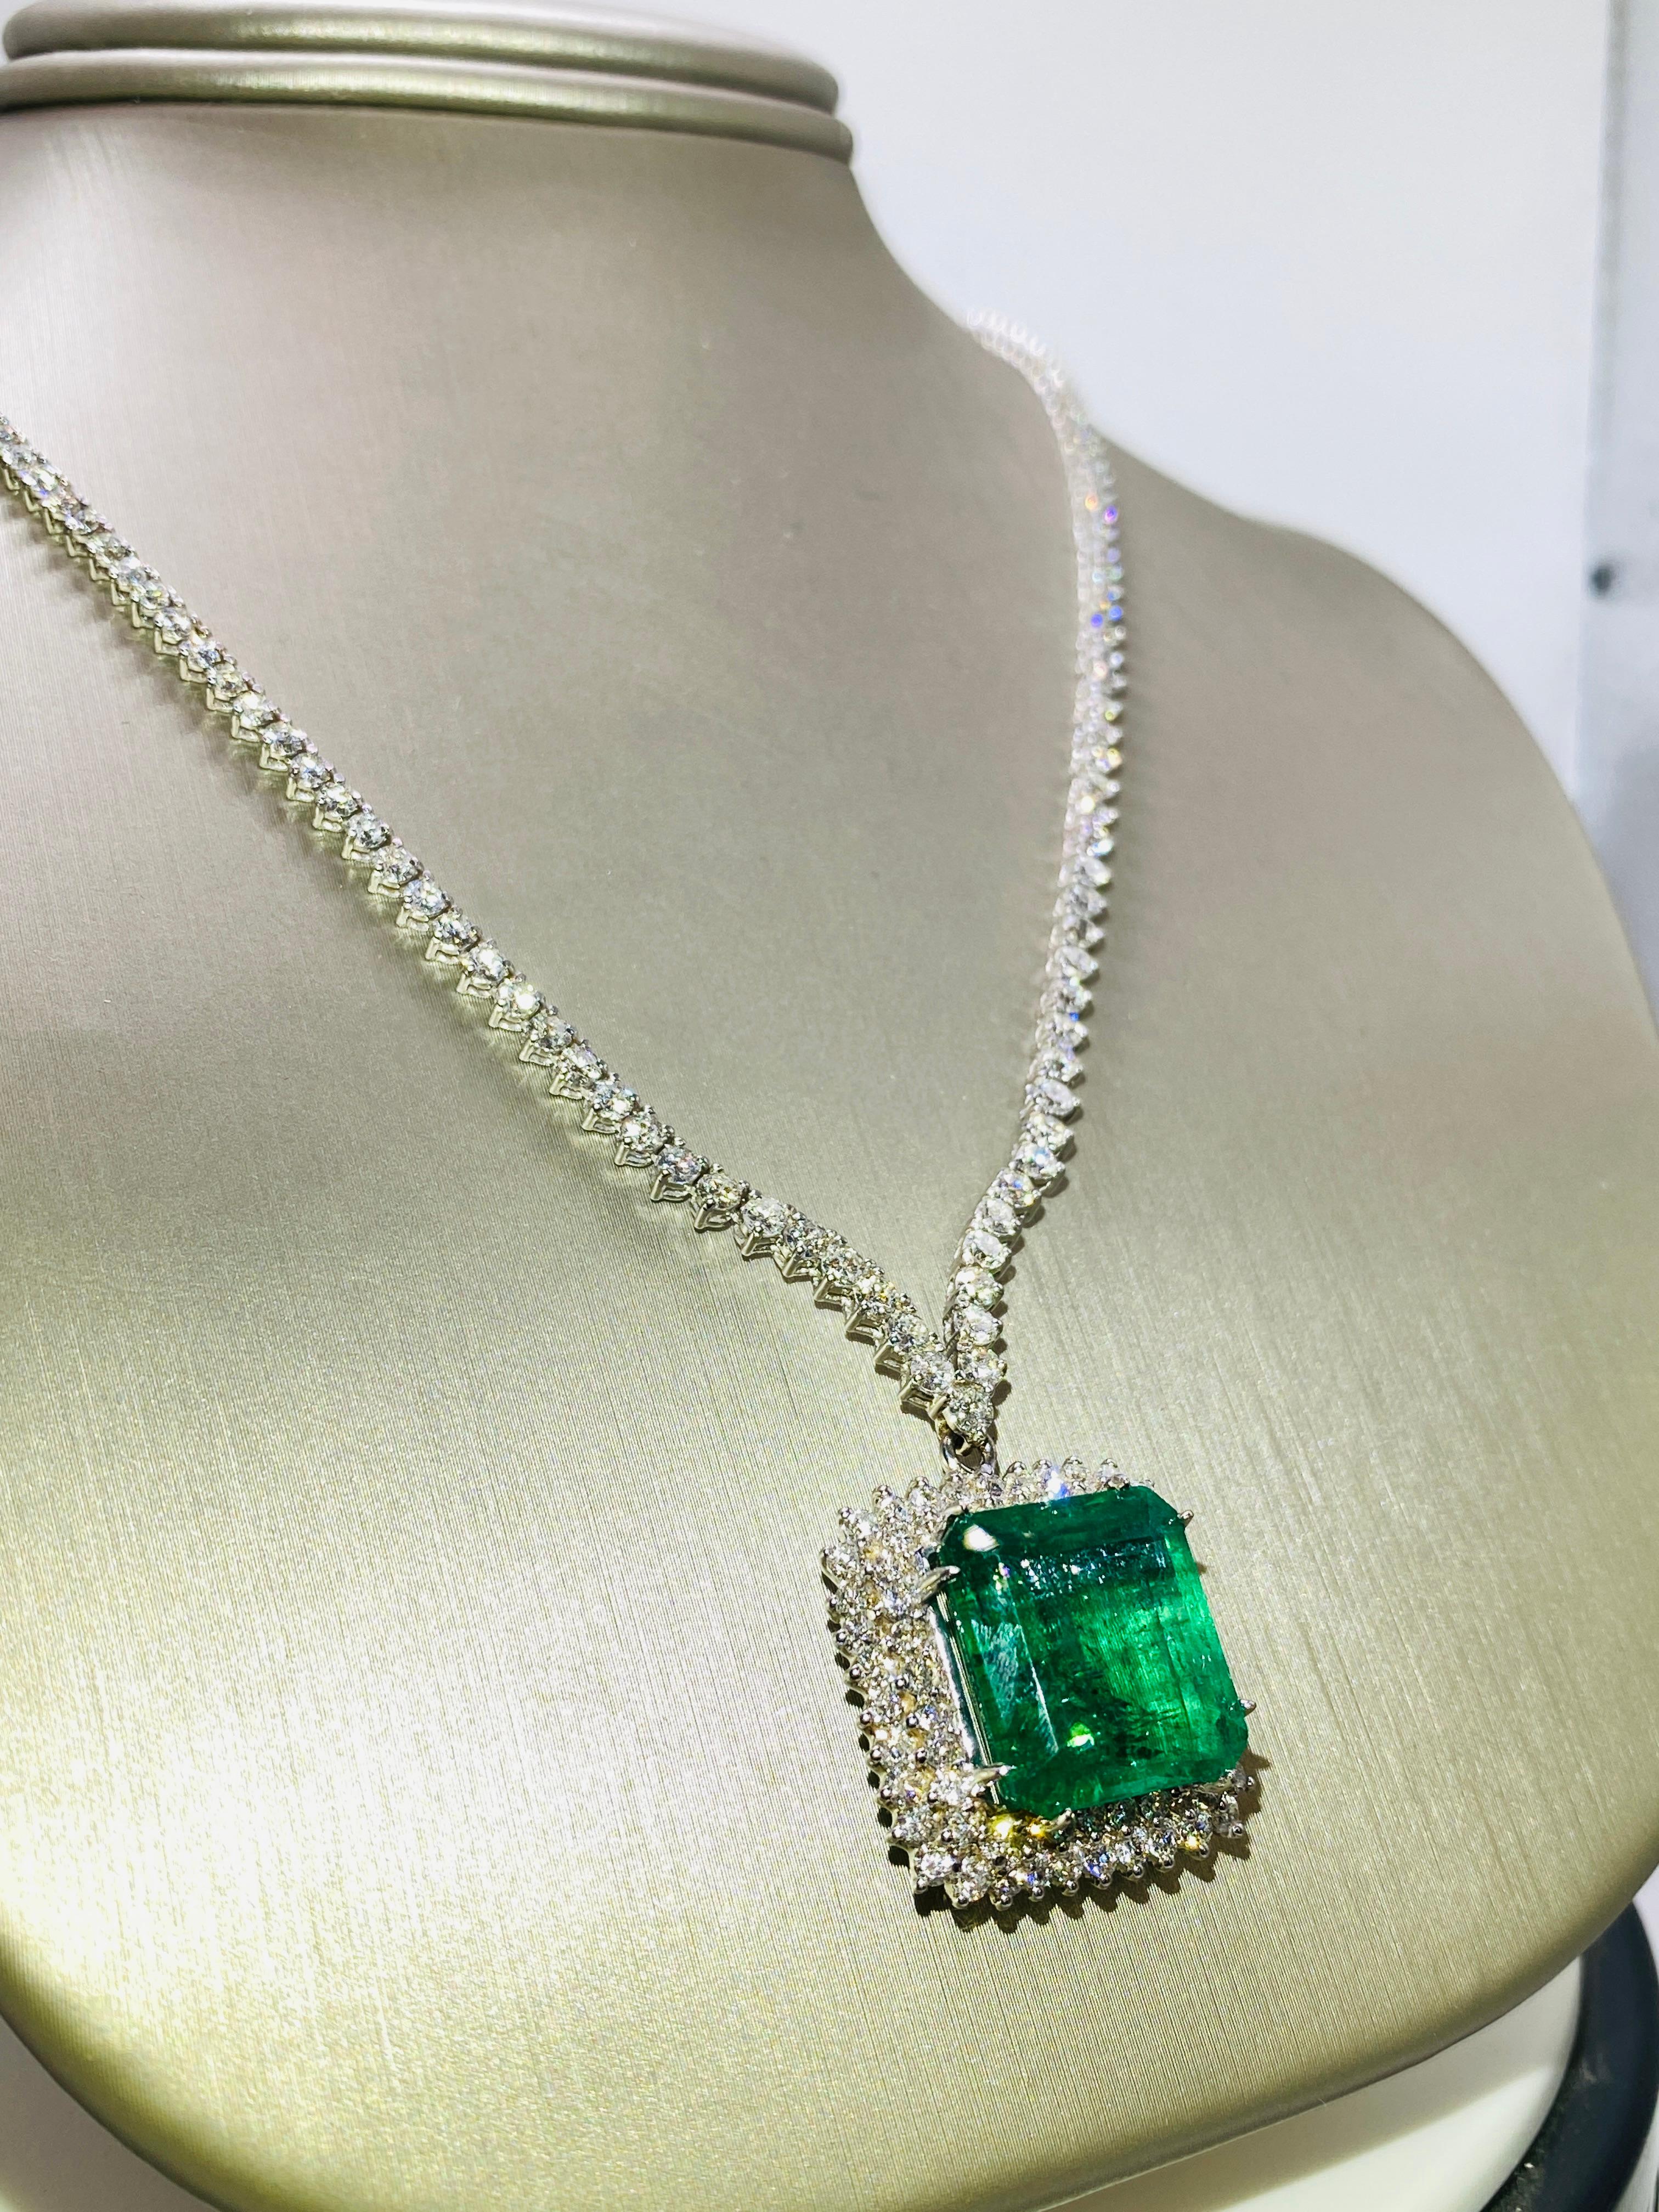 Buy Stunning High Quality Imitation Emerald Necklace Pendant, 18K White  Gold Plated S925 Sterling Silver Necklace Pendant, Gifts for Her Online in  India - Etsy